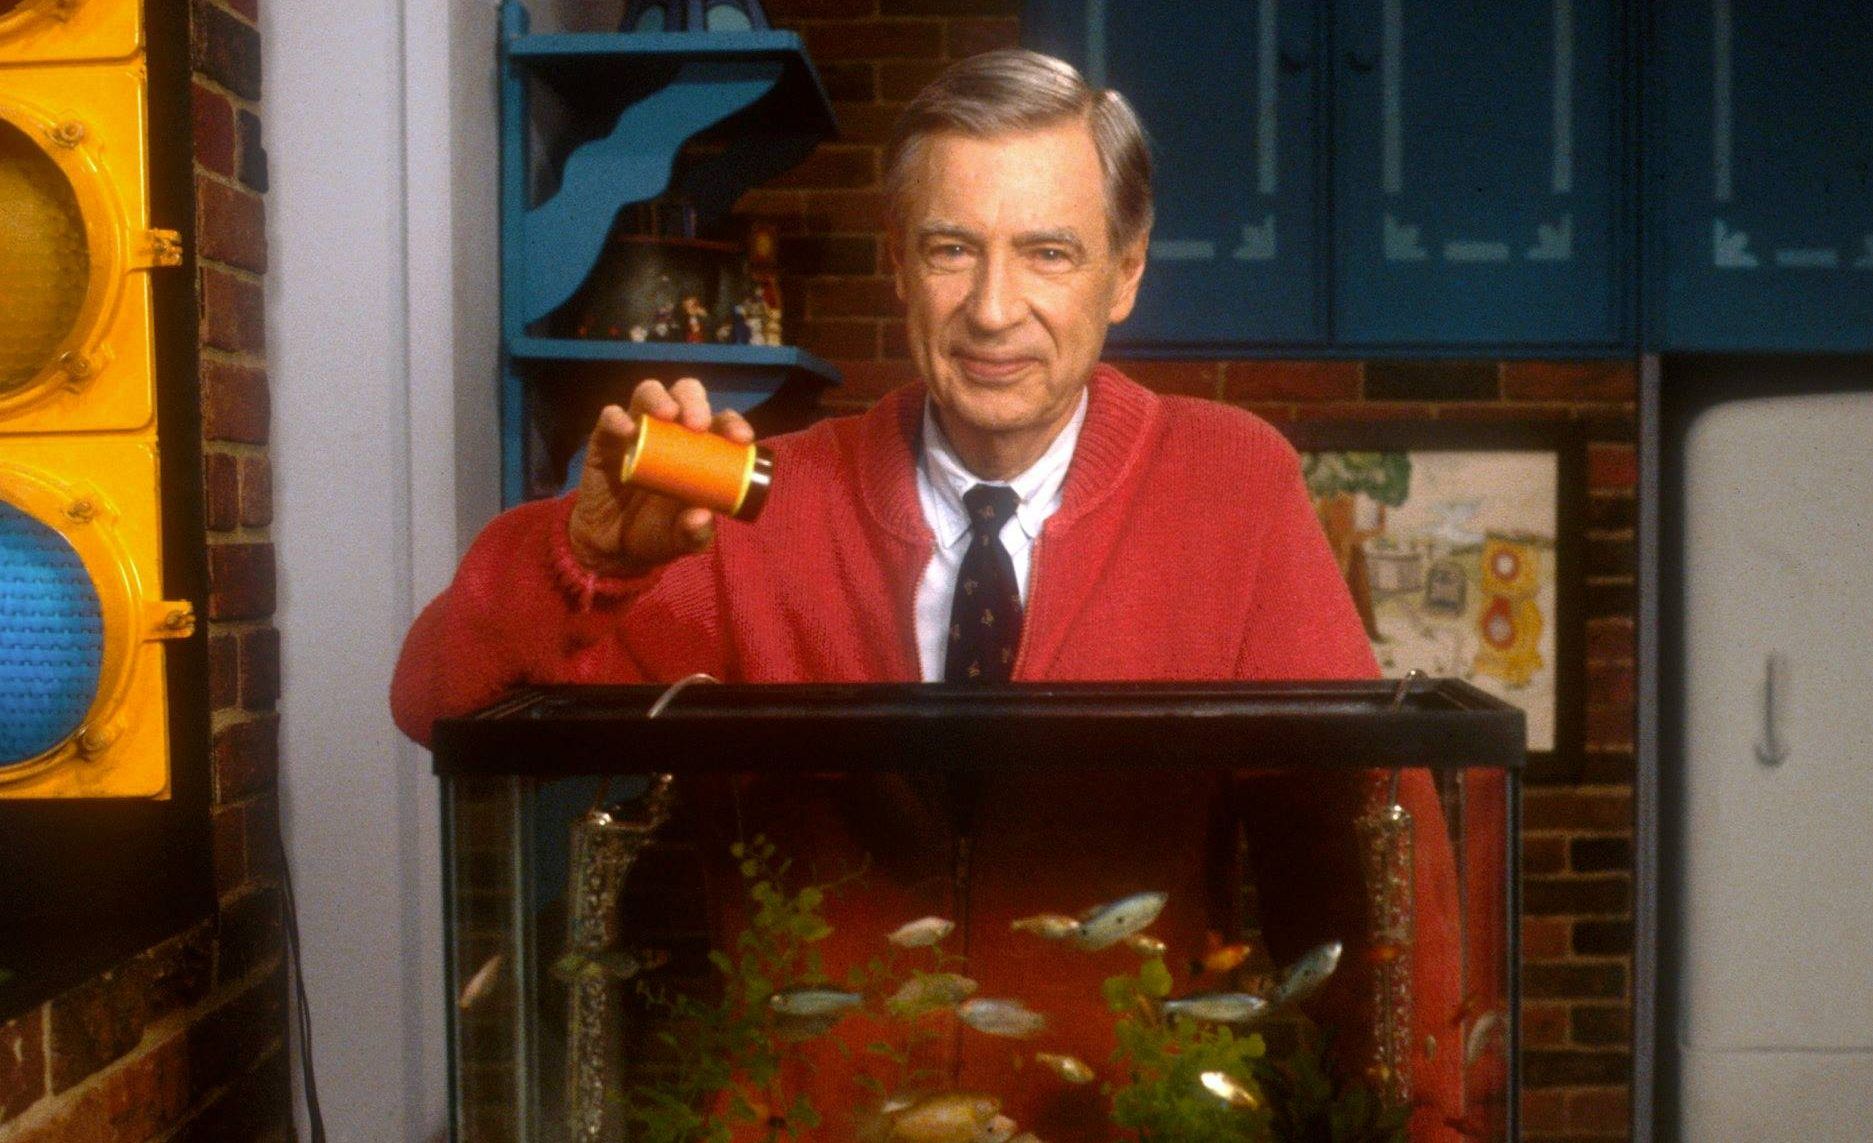 Mister Rogers Feeding His Fish